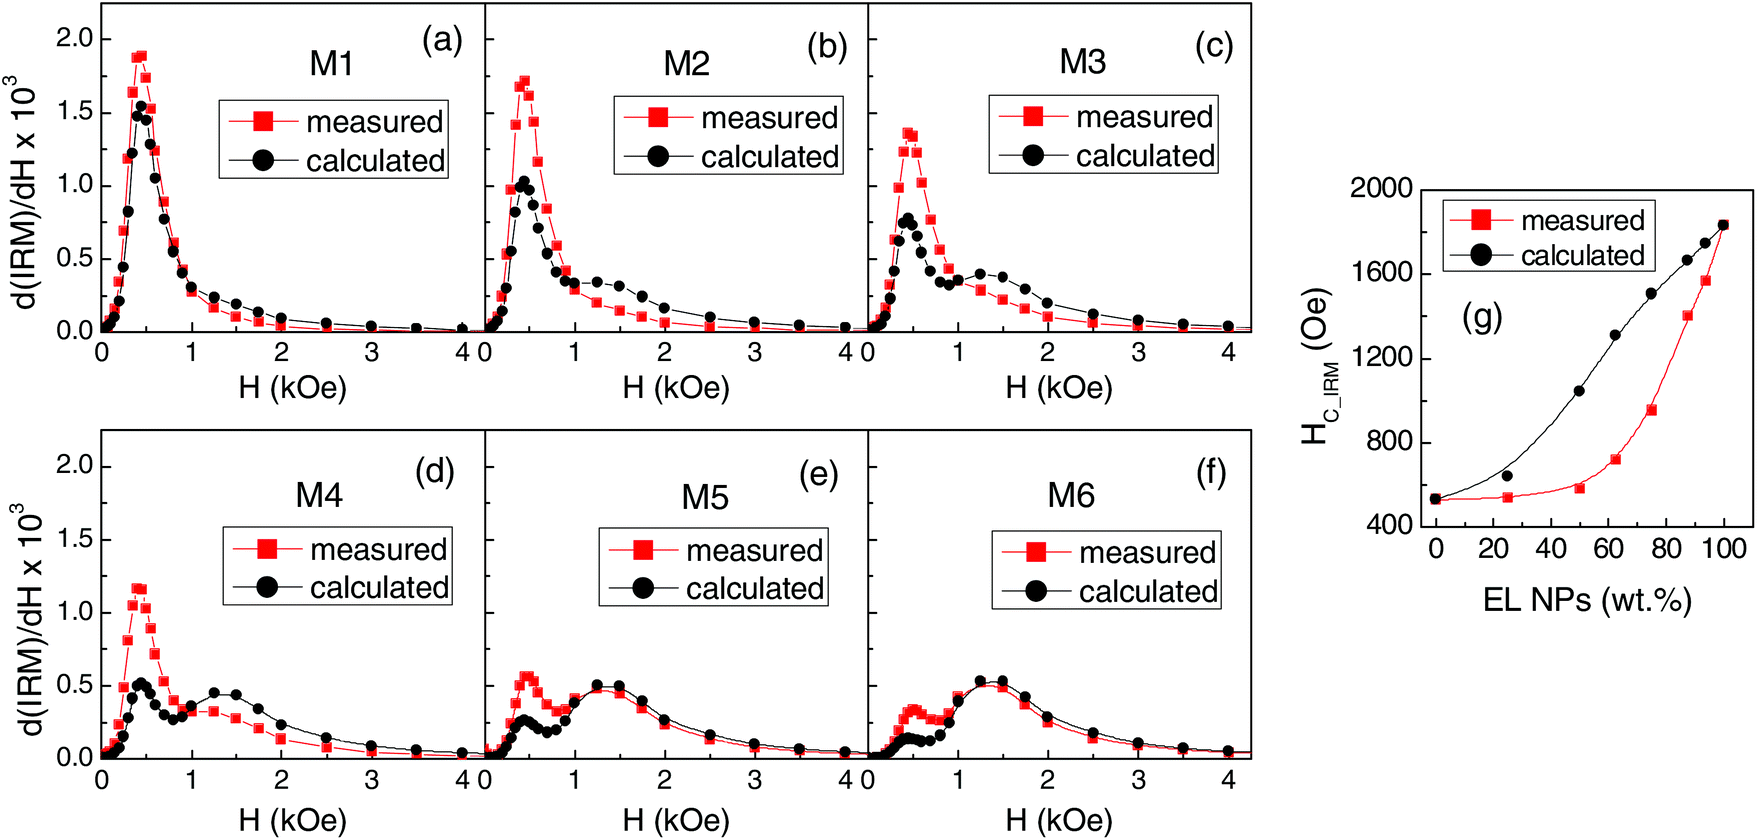 Mixing Iron Oxide Nanoparticles With Different Shape And Size For Tunable Magneto Heating Performance Nanoscale Rsc Publishing Doi 10 1039 D0nra